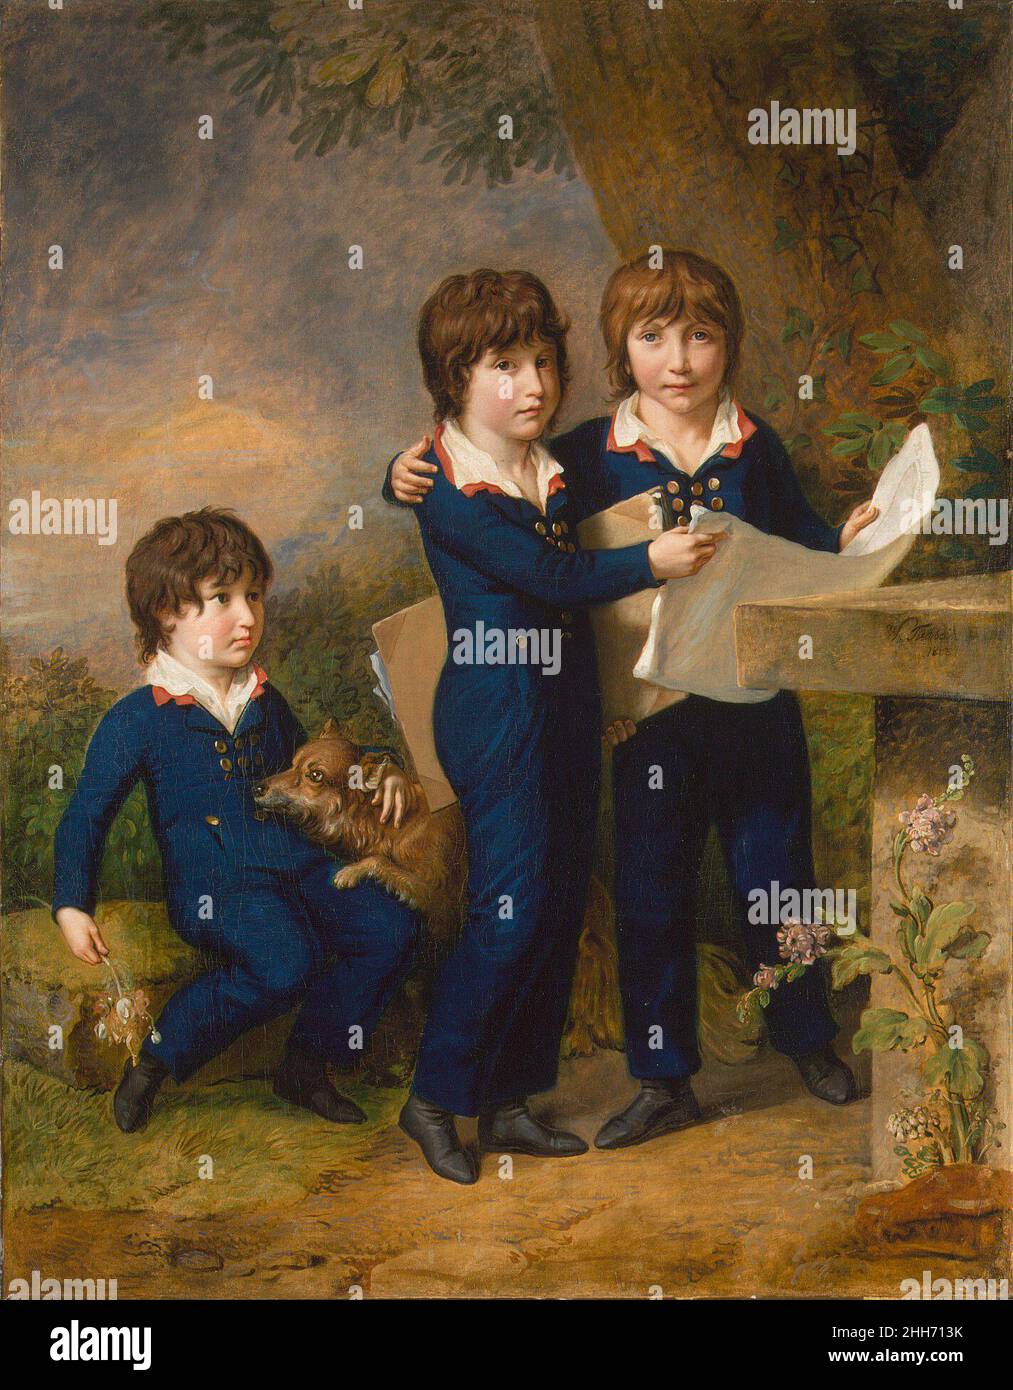 The Children of Martin Anton Heckscher: Johann Gustav Wilhelm Moritz (1797–1865), Carl Martin Adolph (1796–1850), and Leopold (born 1792) 1805 Johann Heinrich Wilhelm Tischbein German Sons of the Hamburg banker Martin Anton Hecksher examine a plan of the Schnepfenthal school, founded in Gotha in 1787 and considered one of the most progressive in Germany. Tischbein was at the heart of German Romanticism’s rich intellectual culture, and he depicts the young students in a natural setting that was sympathetic to Enlightenment educational reforms that swept Europe and encouraged a new vision of chi Stock Photo